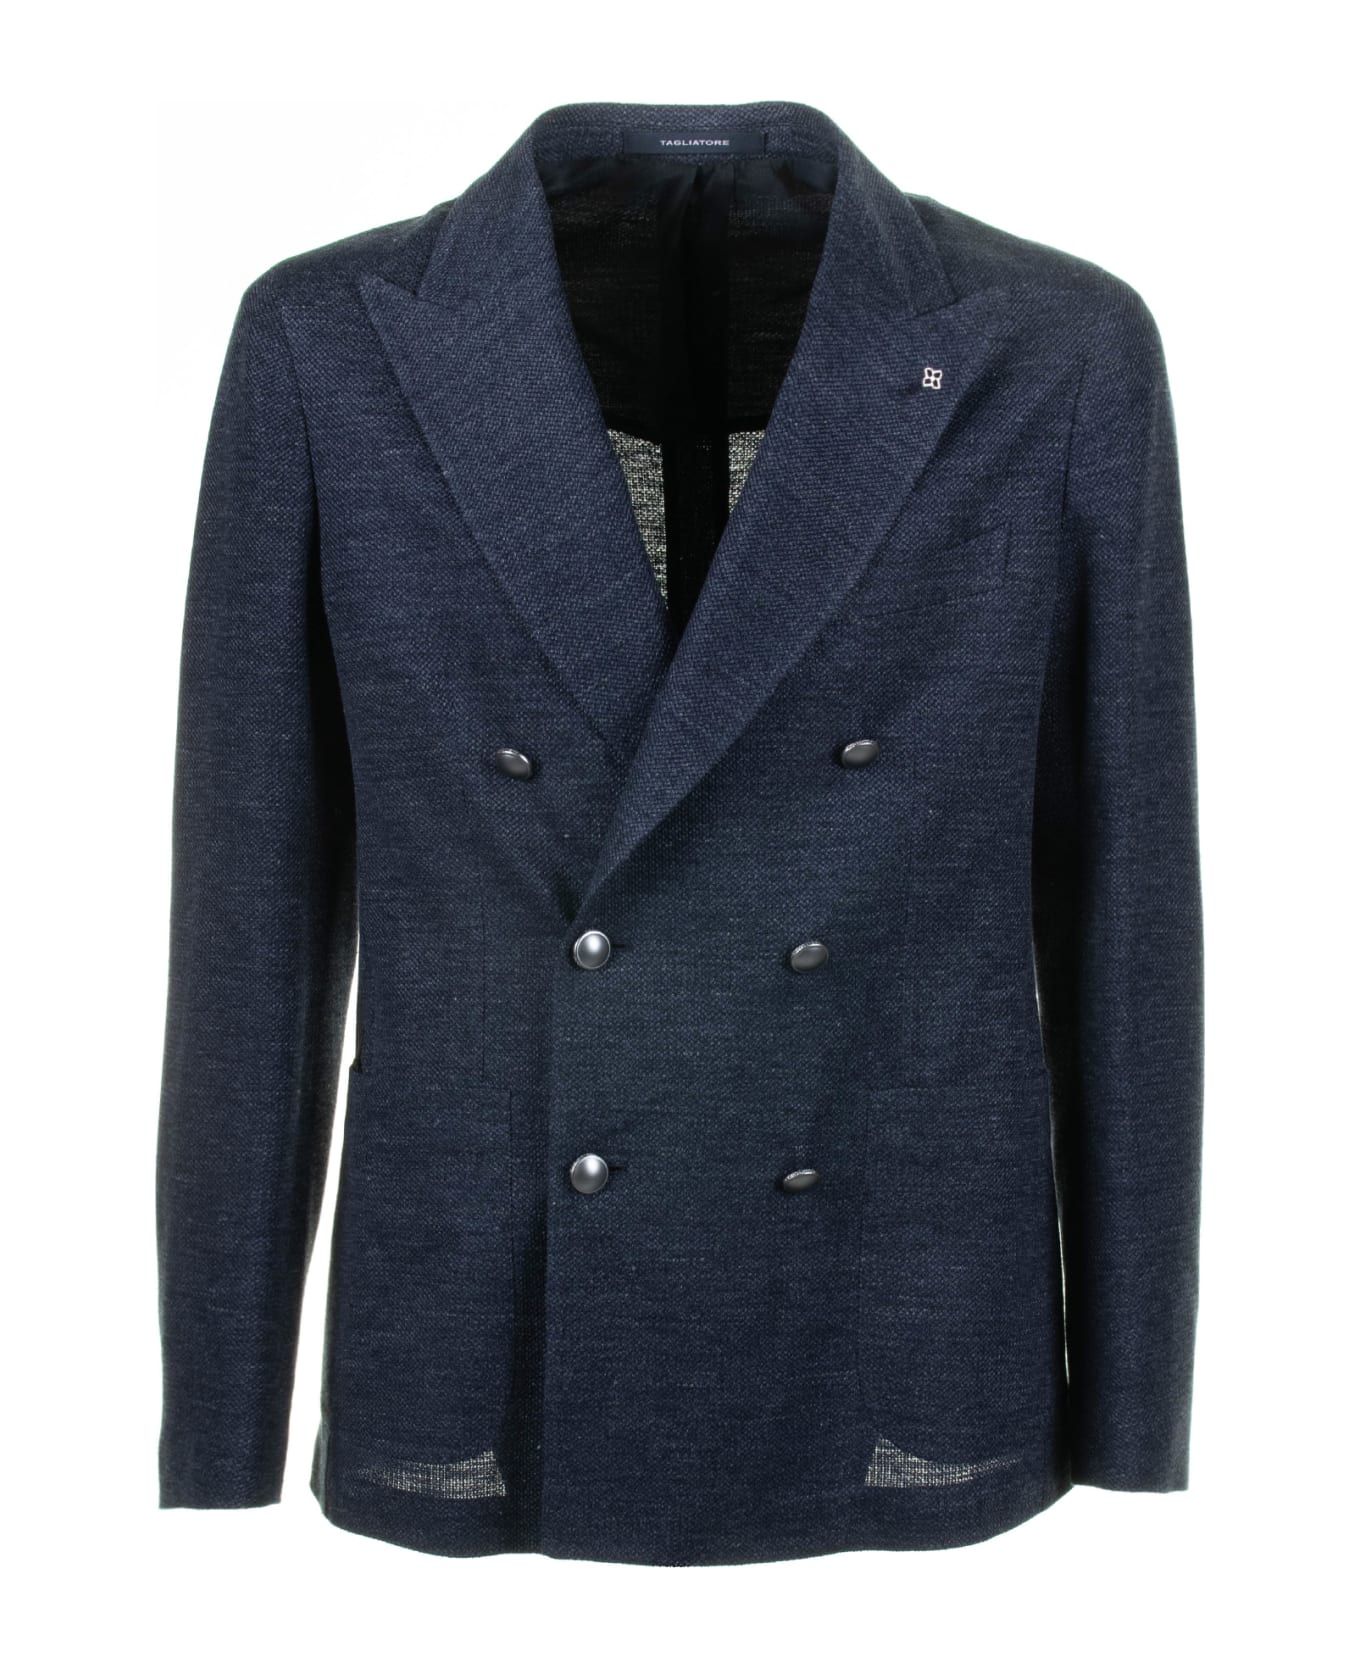 Tagliatore Navy Blue Double-breasted Jacket - NAVY